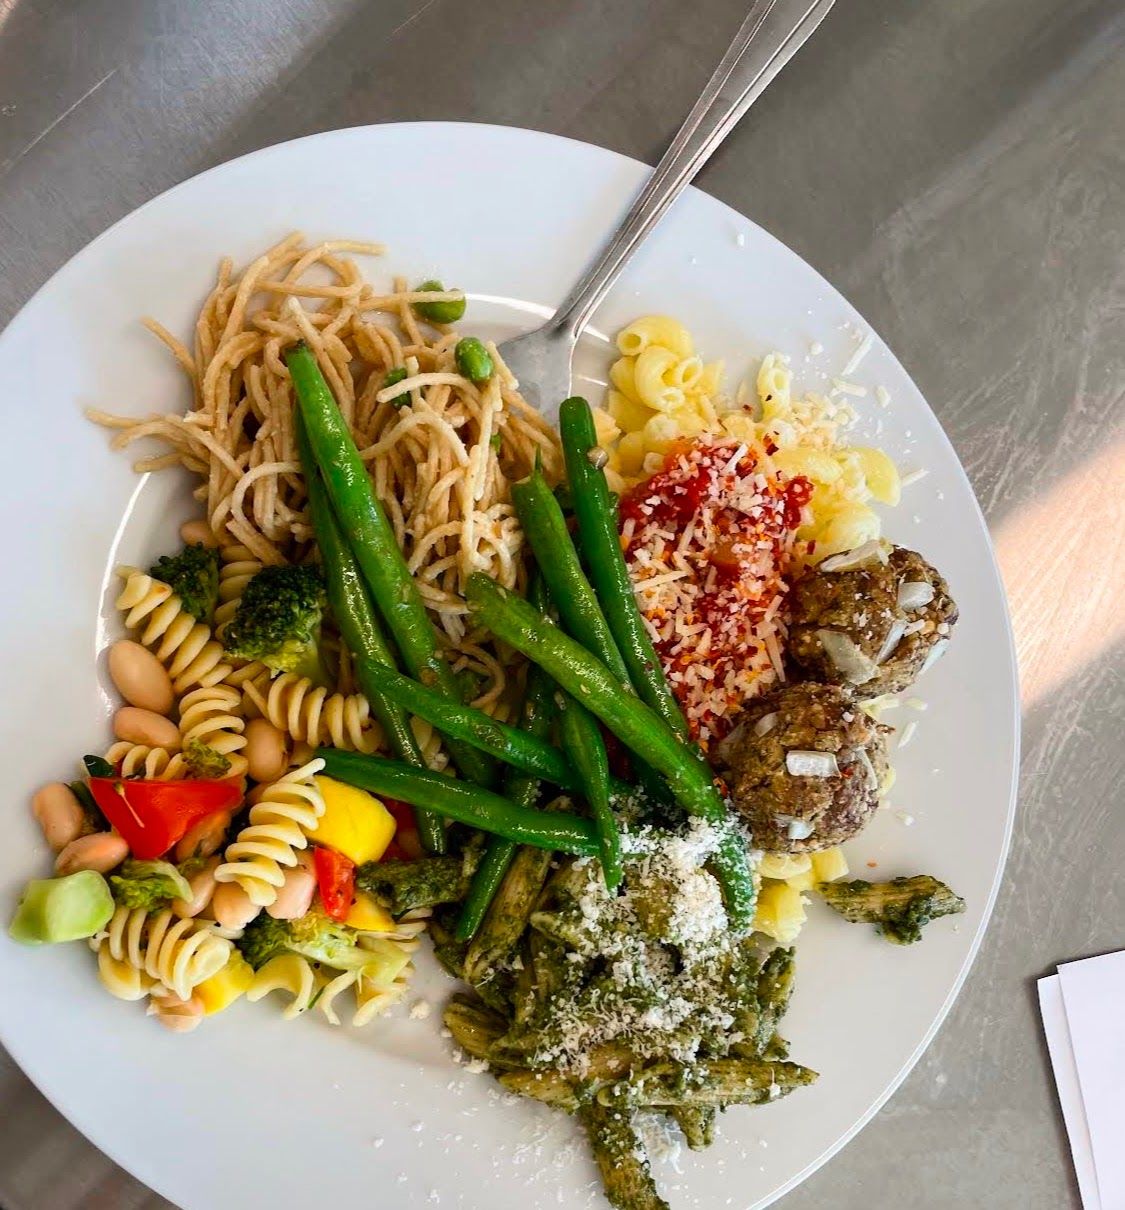 Plate of Food, Including Pasta, Cheese, and Green Beans